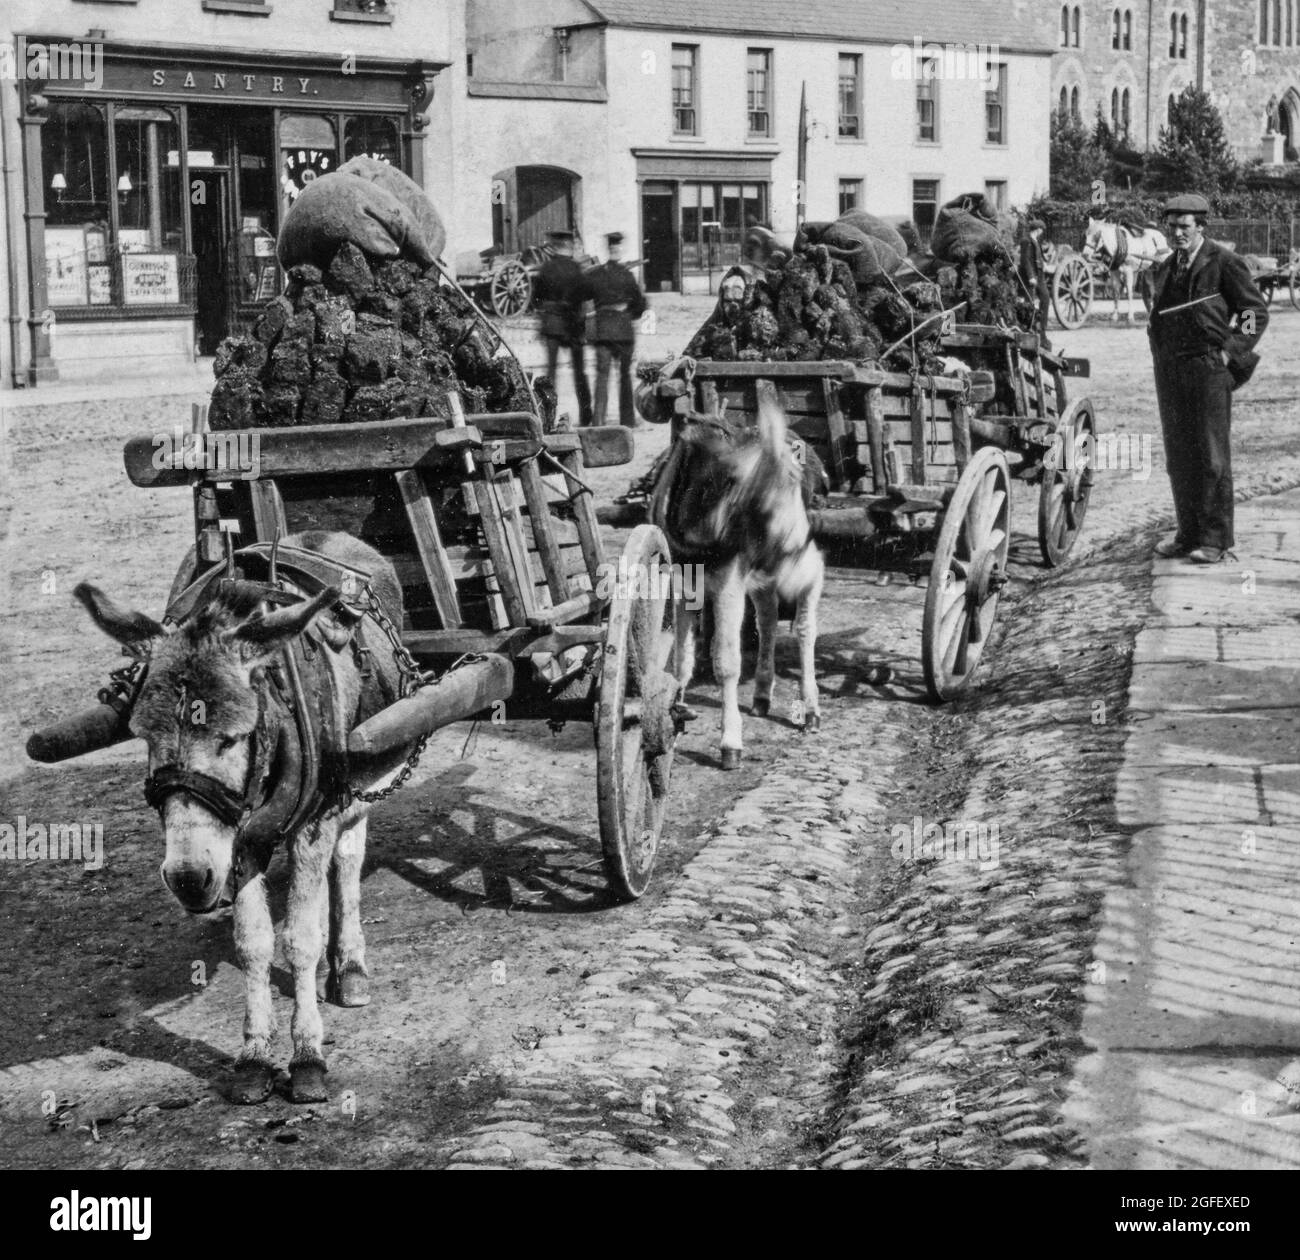 An early 20th Century photograph of two members of the RIC (Royal Irish Constabulary) passing donkey carts laden with turf (aka peat) in the Market Square, Killarney town, County Kerry, Ireland. Stock Photo